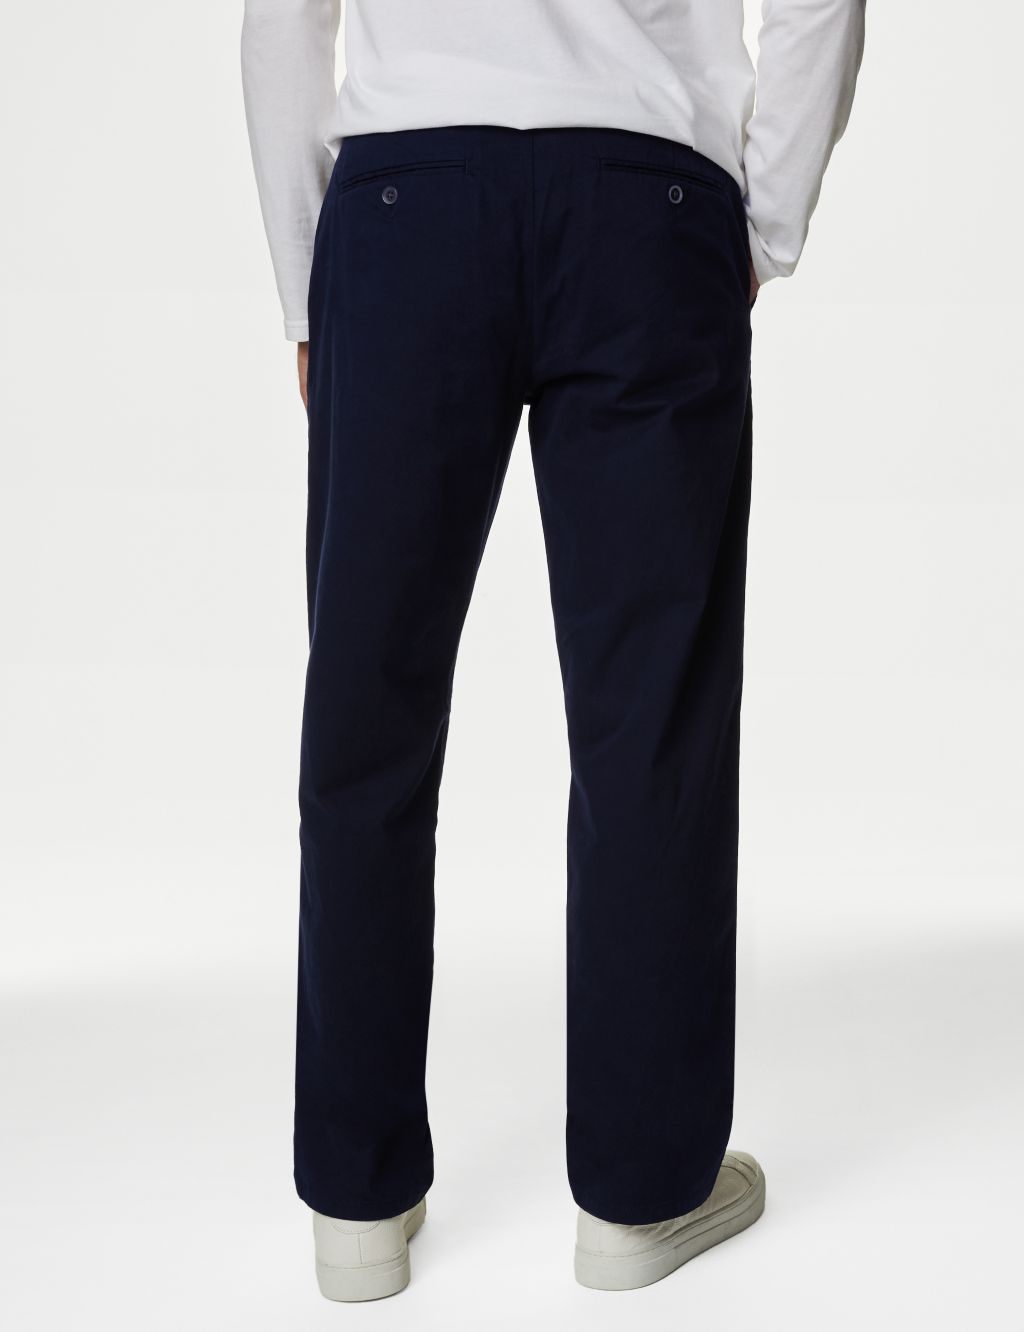 Loose Fit Stretch Chinos image 5